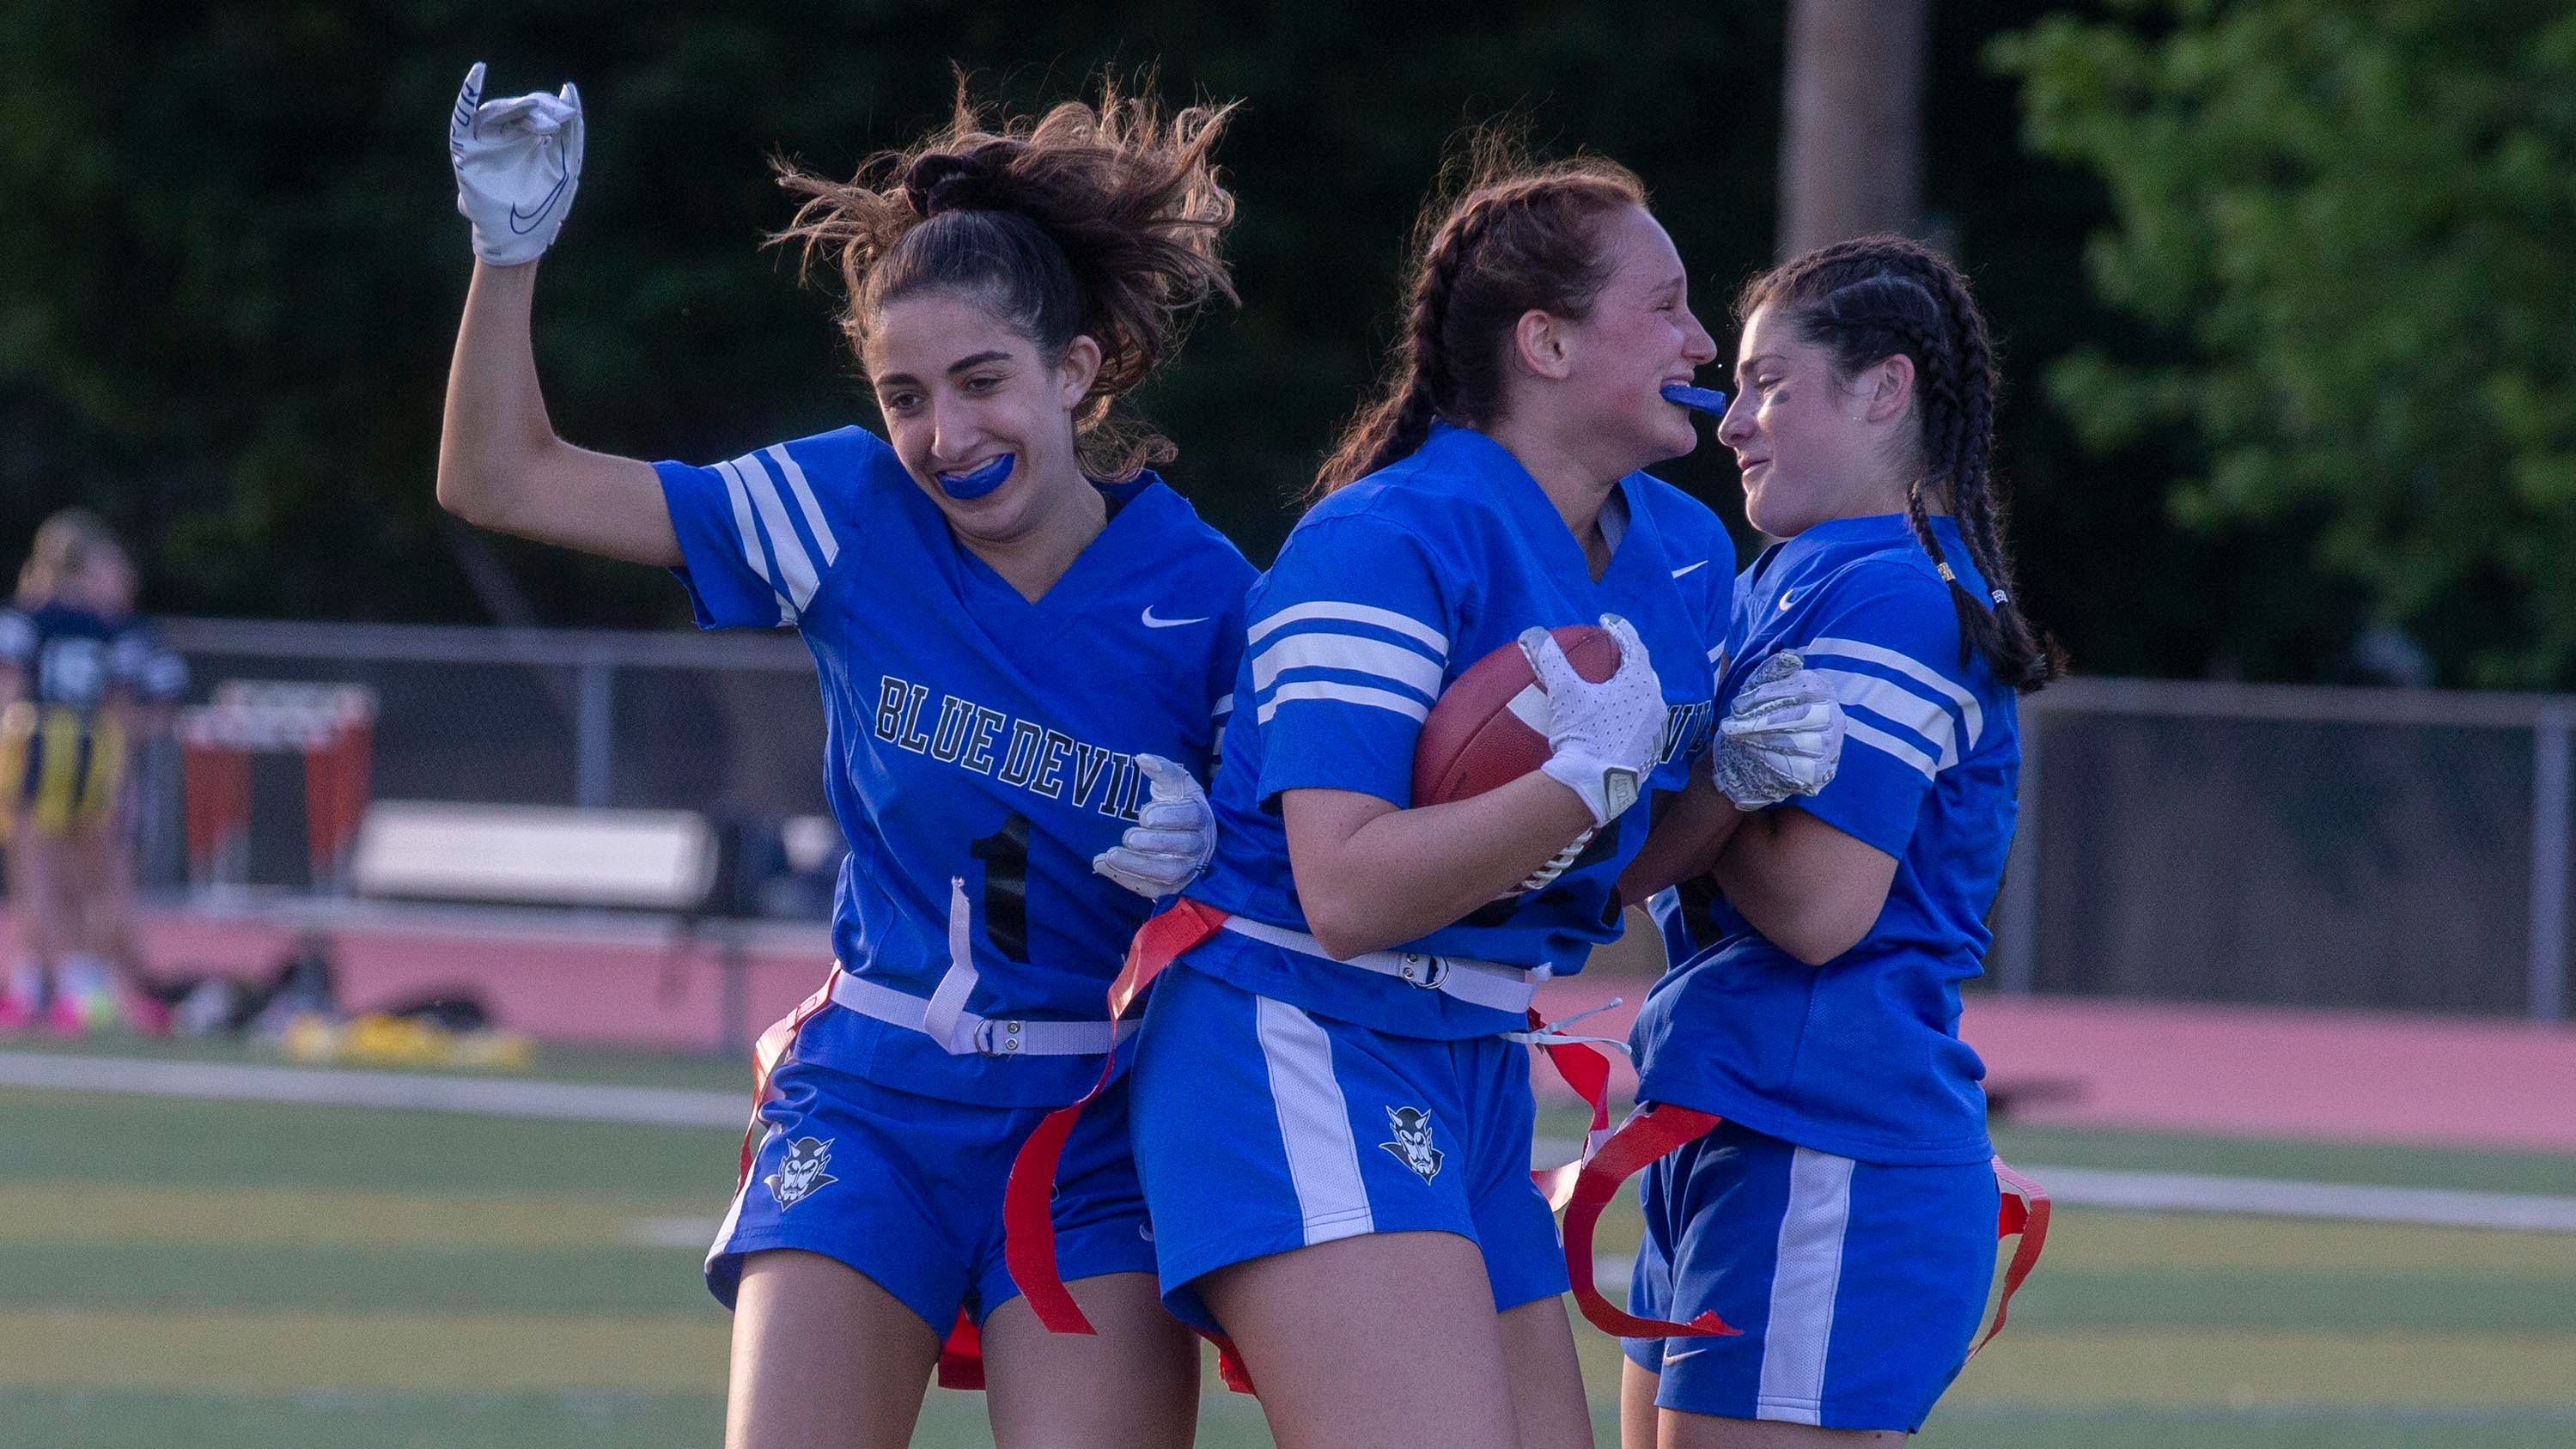 NJ girls high school flag football catching on in Shore Conference